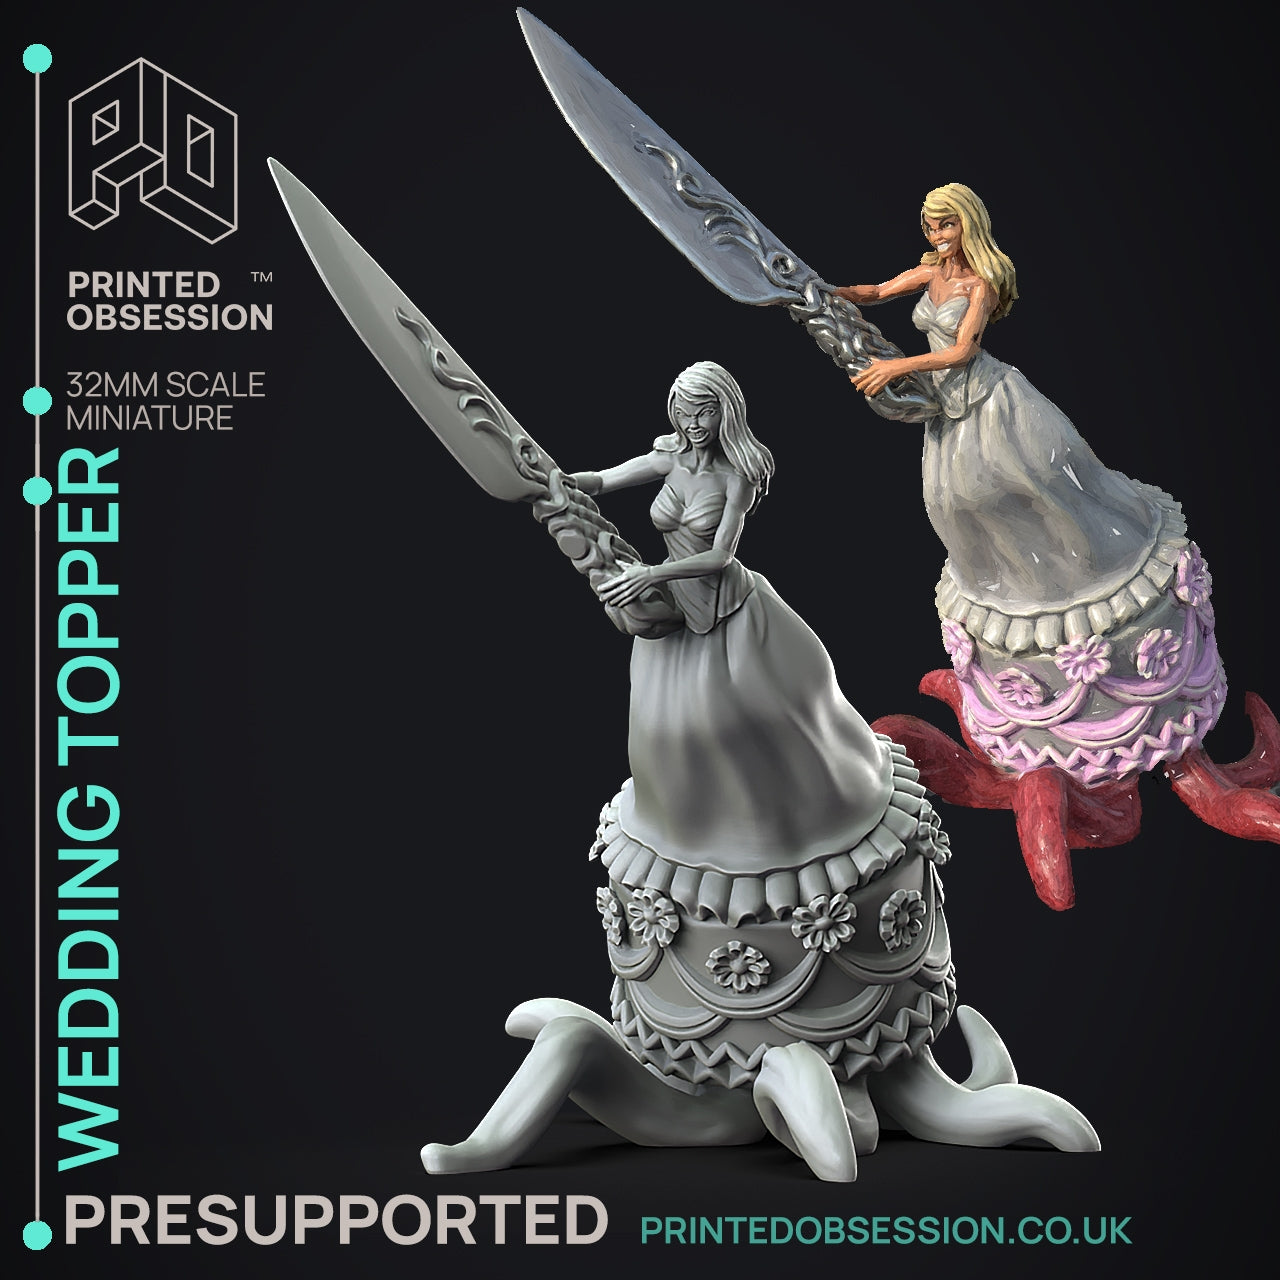 Wedding Topper - The Possessed Bakery - The Printed Obsession - Table-top mini, 3D Printed Collectable for painting and playing!